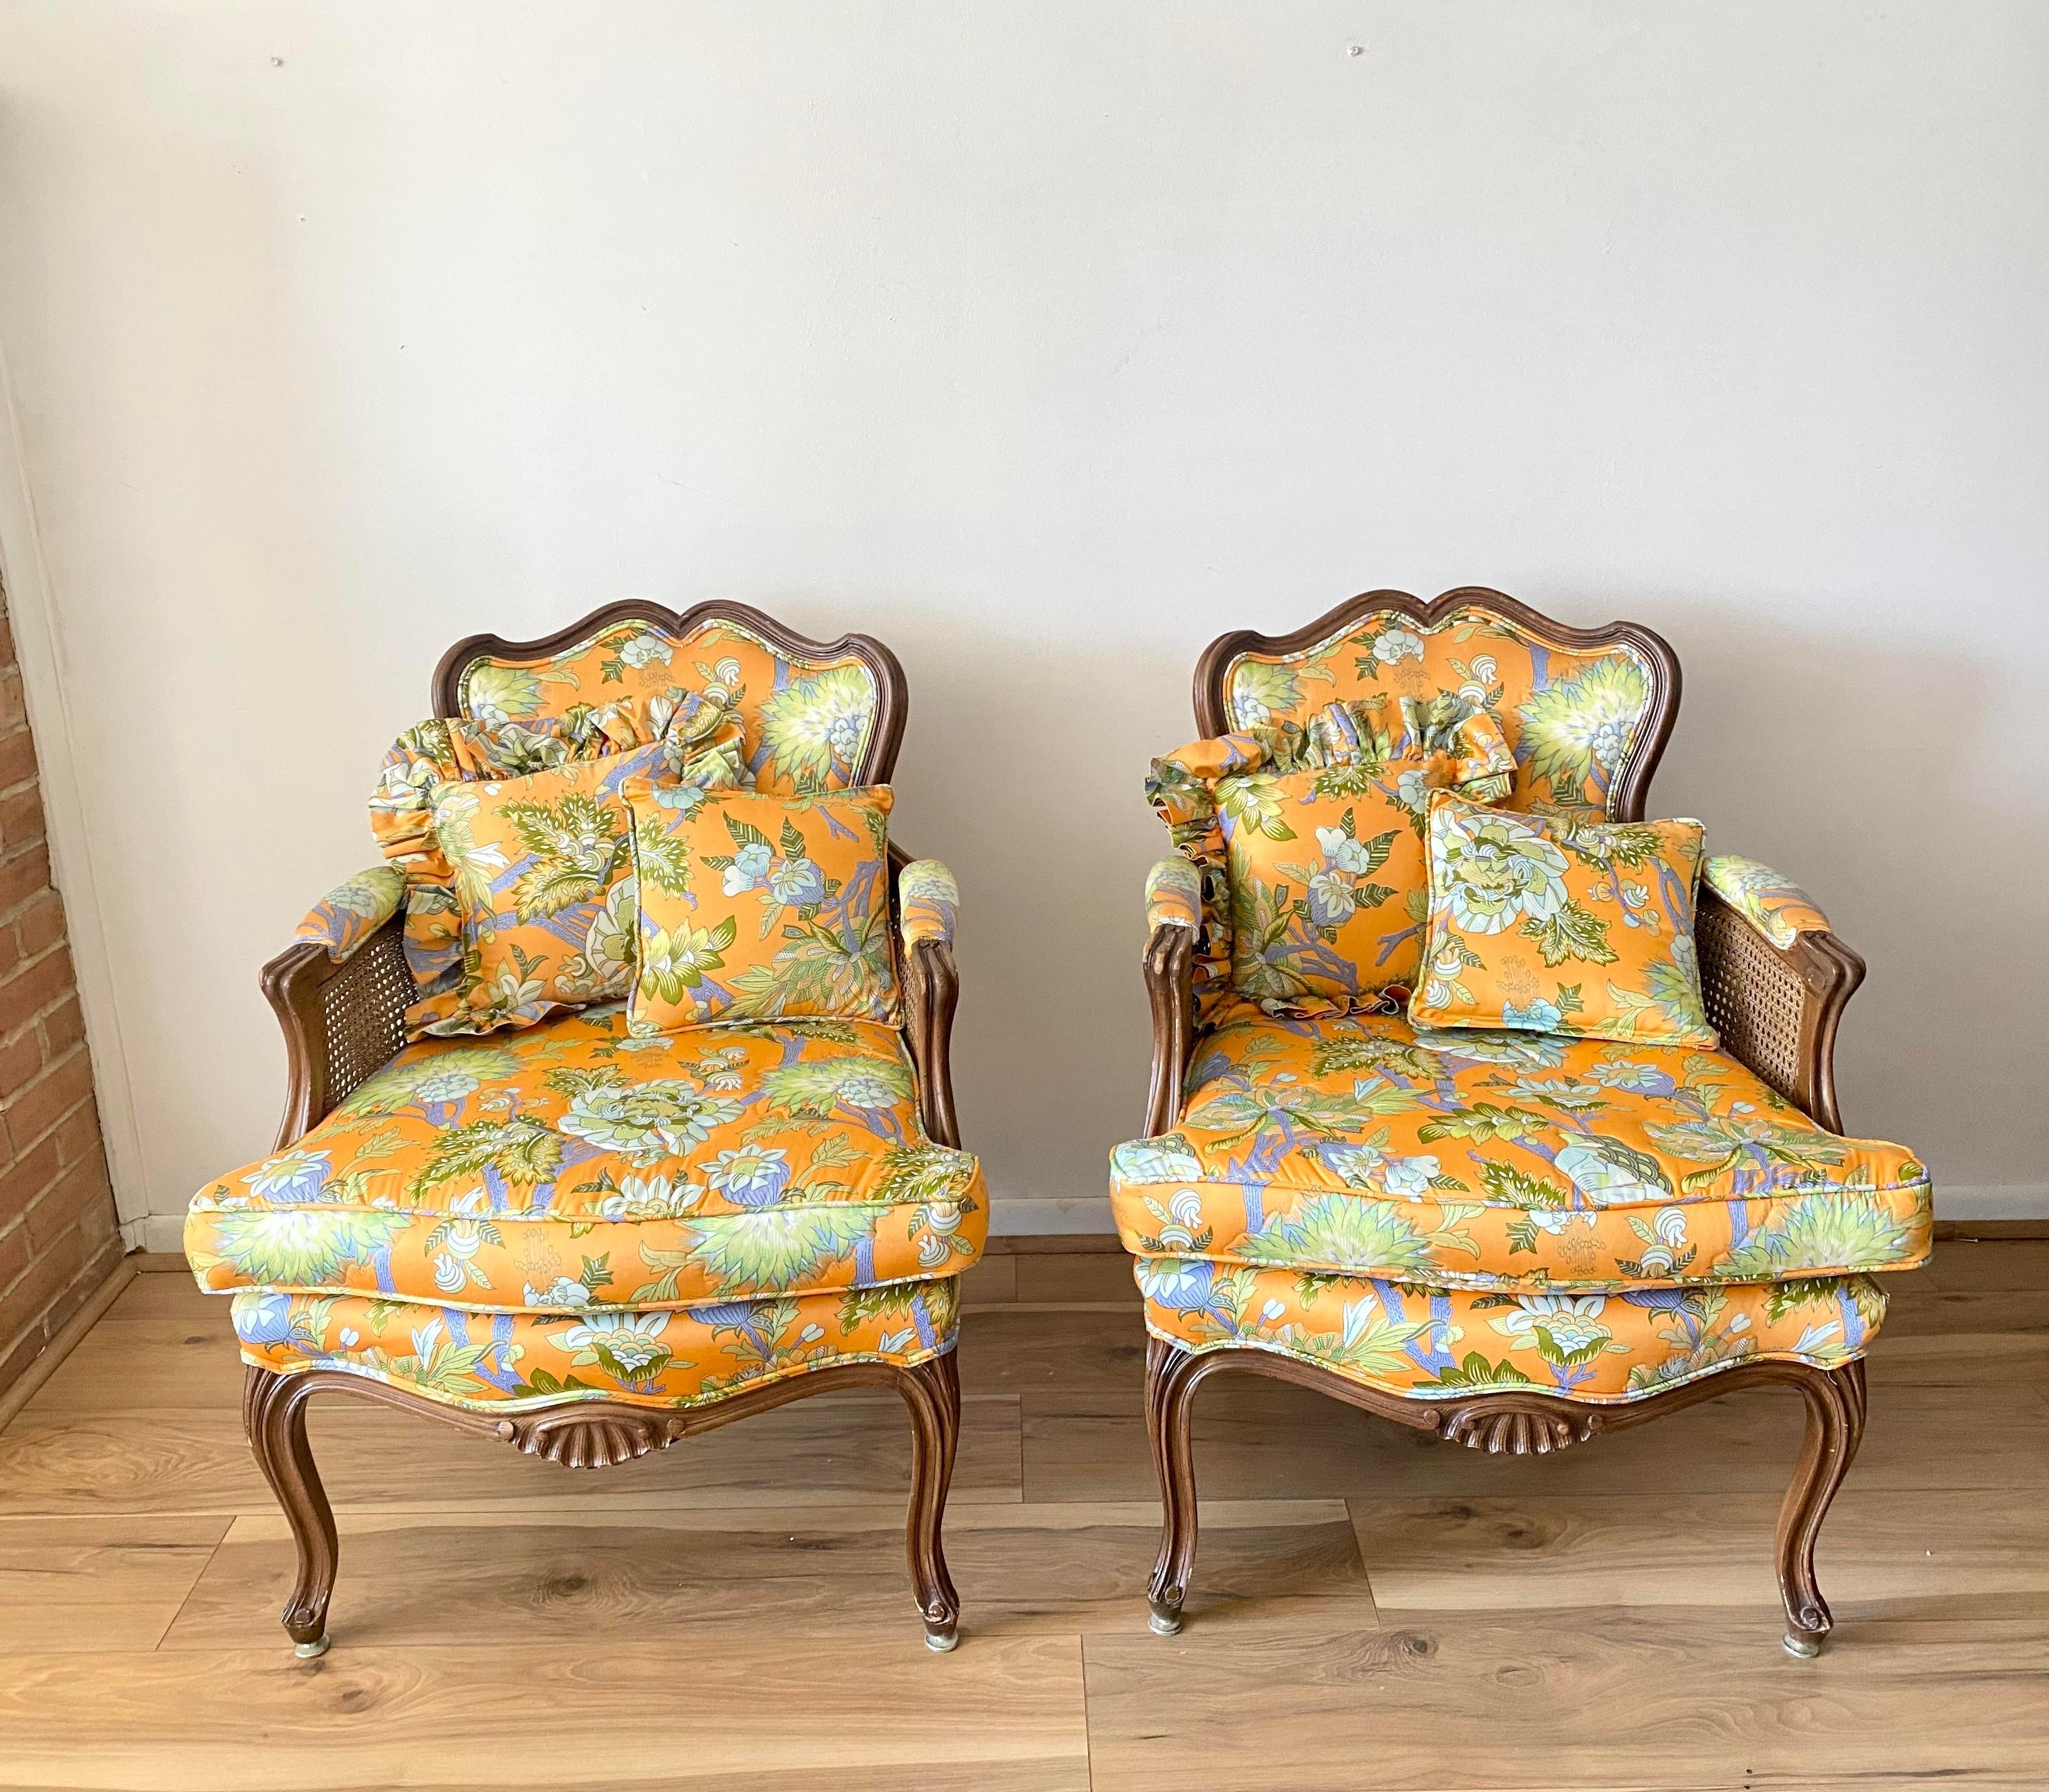 20th Century French Louis XV Style Bergere Armchairs With Floral Upholstery